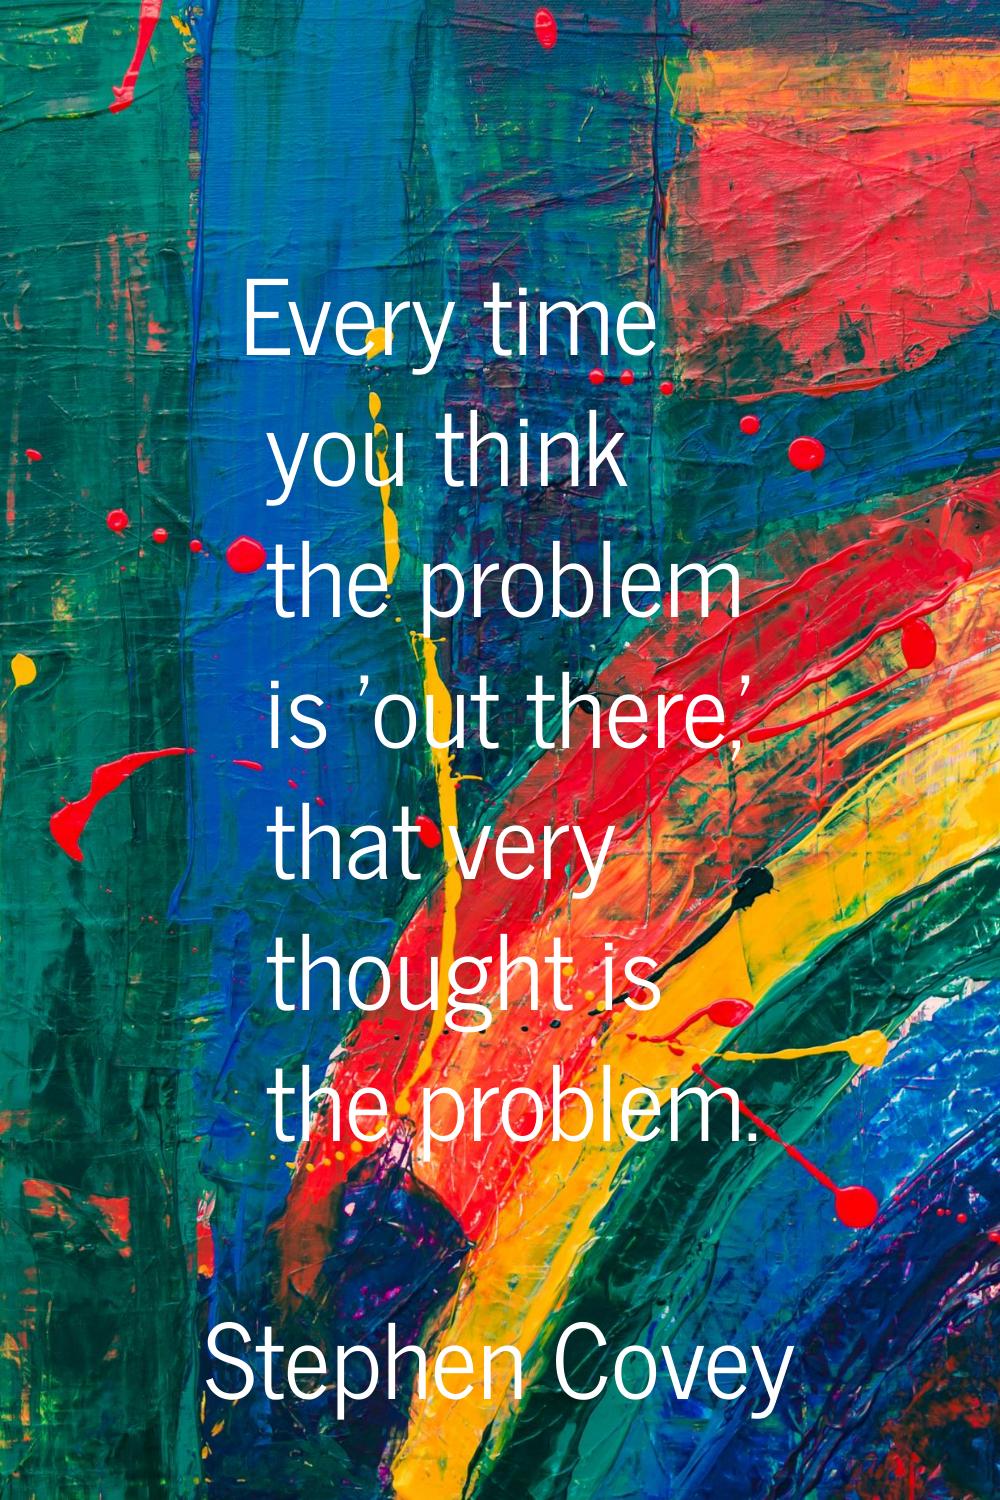 Every time you think the problem is 'out there,' that very thought is the problem.